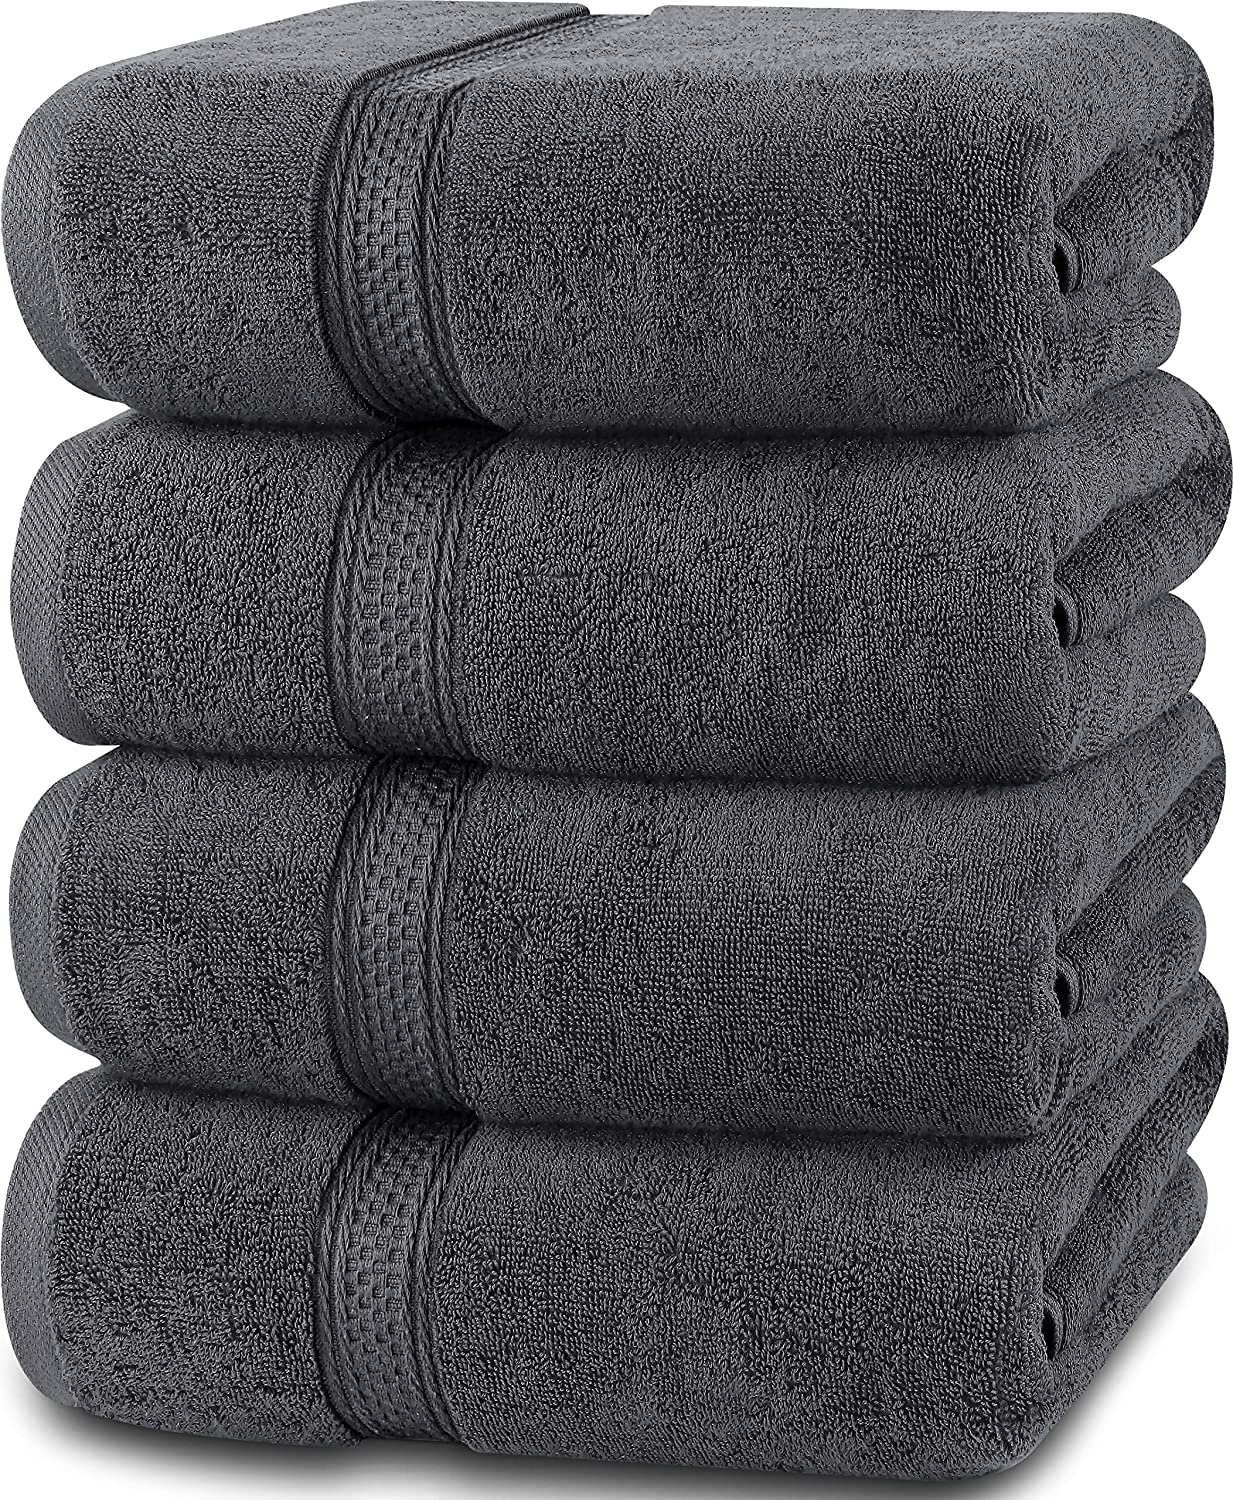 Utopia Towels 8-Piece Premium Towel Set, 2 Bath Towels, 2 Hand Towels, and  4 Wash Cloths, 600 GSM 100% Ring Spun Cotton Highly Absorbent Towels for  Bathroom, Gy…